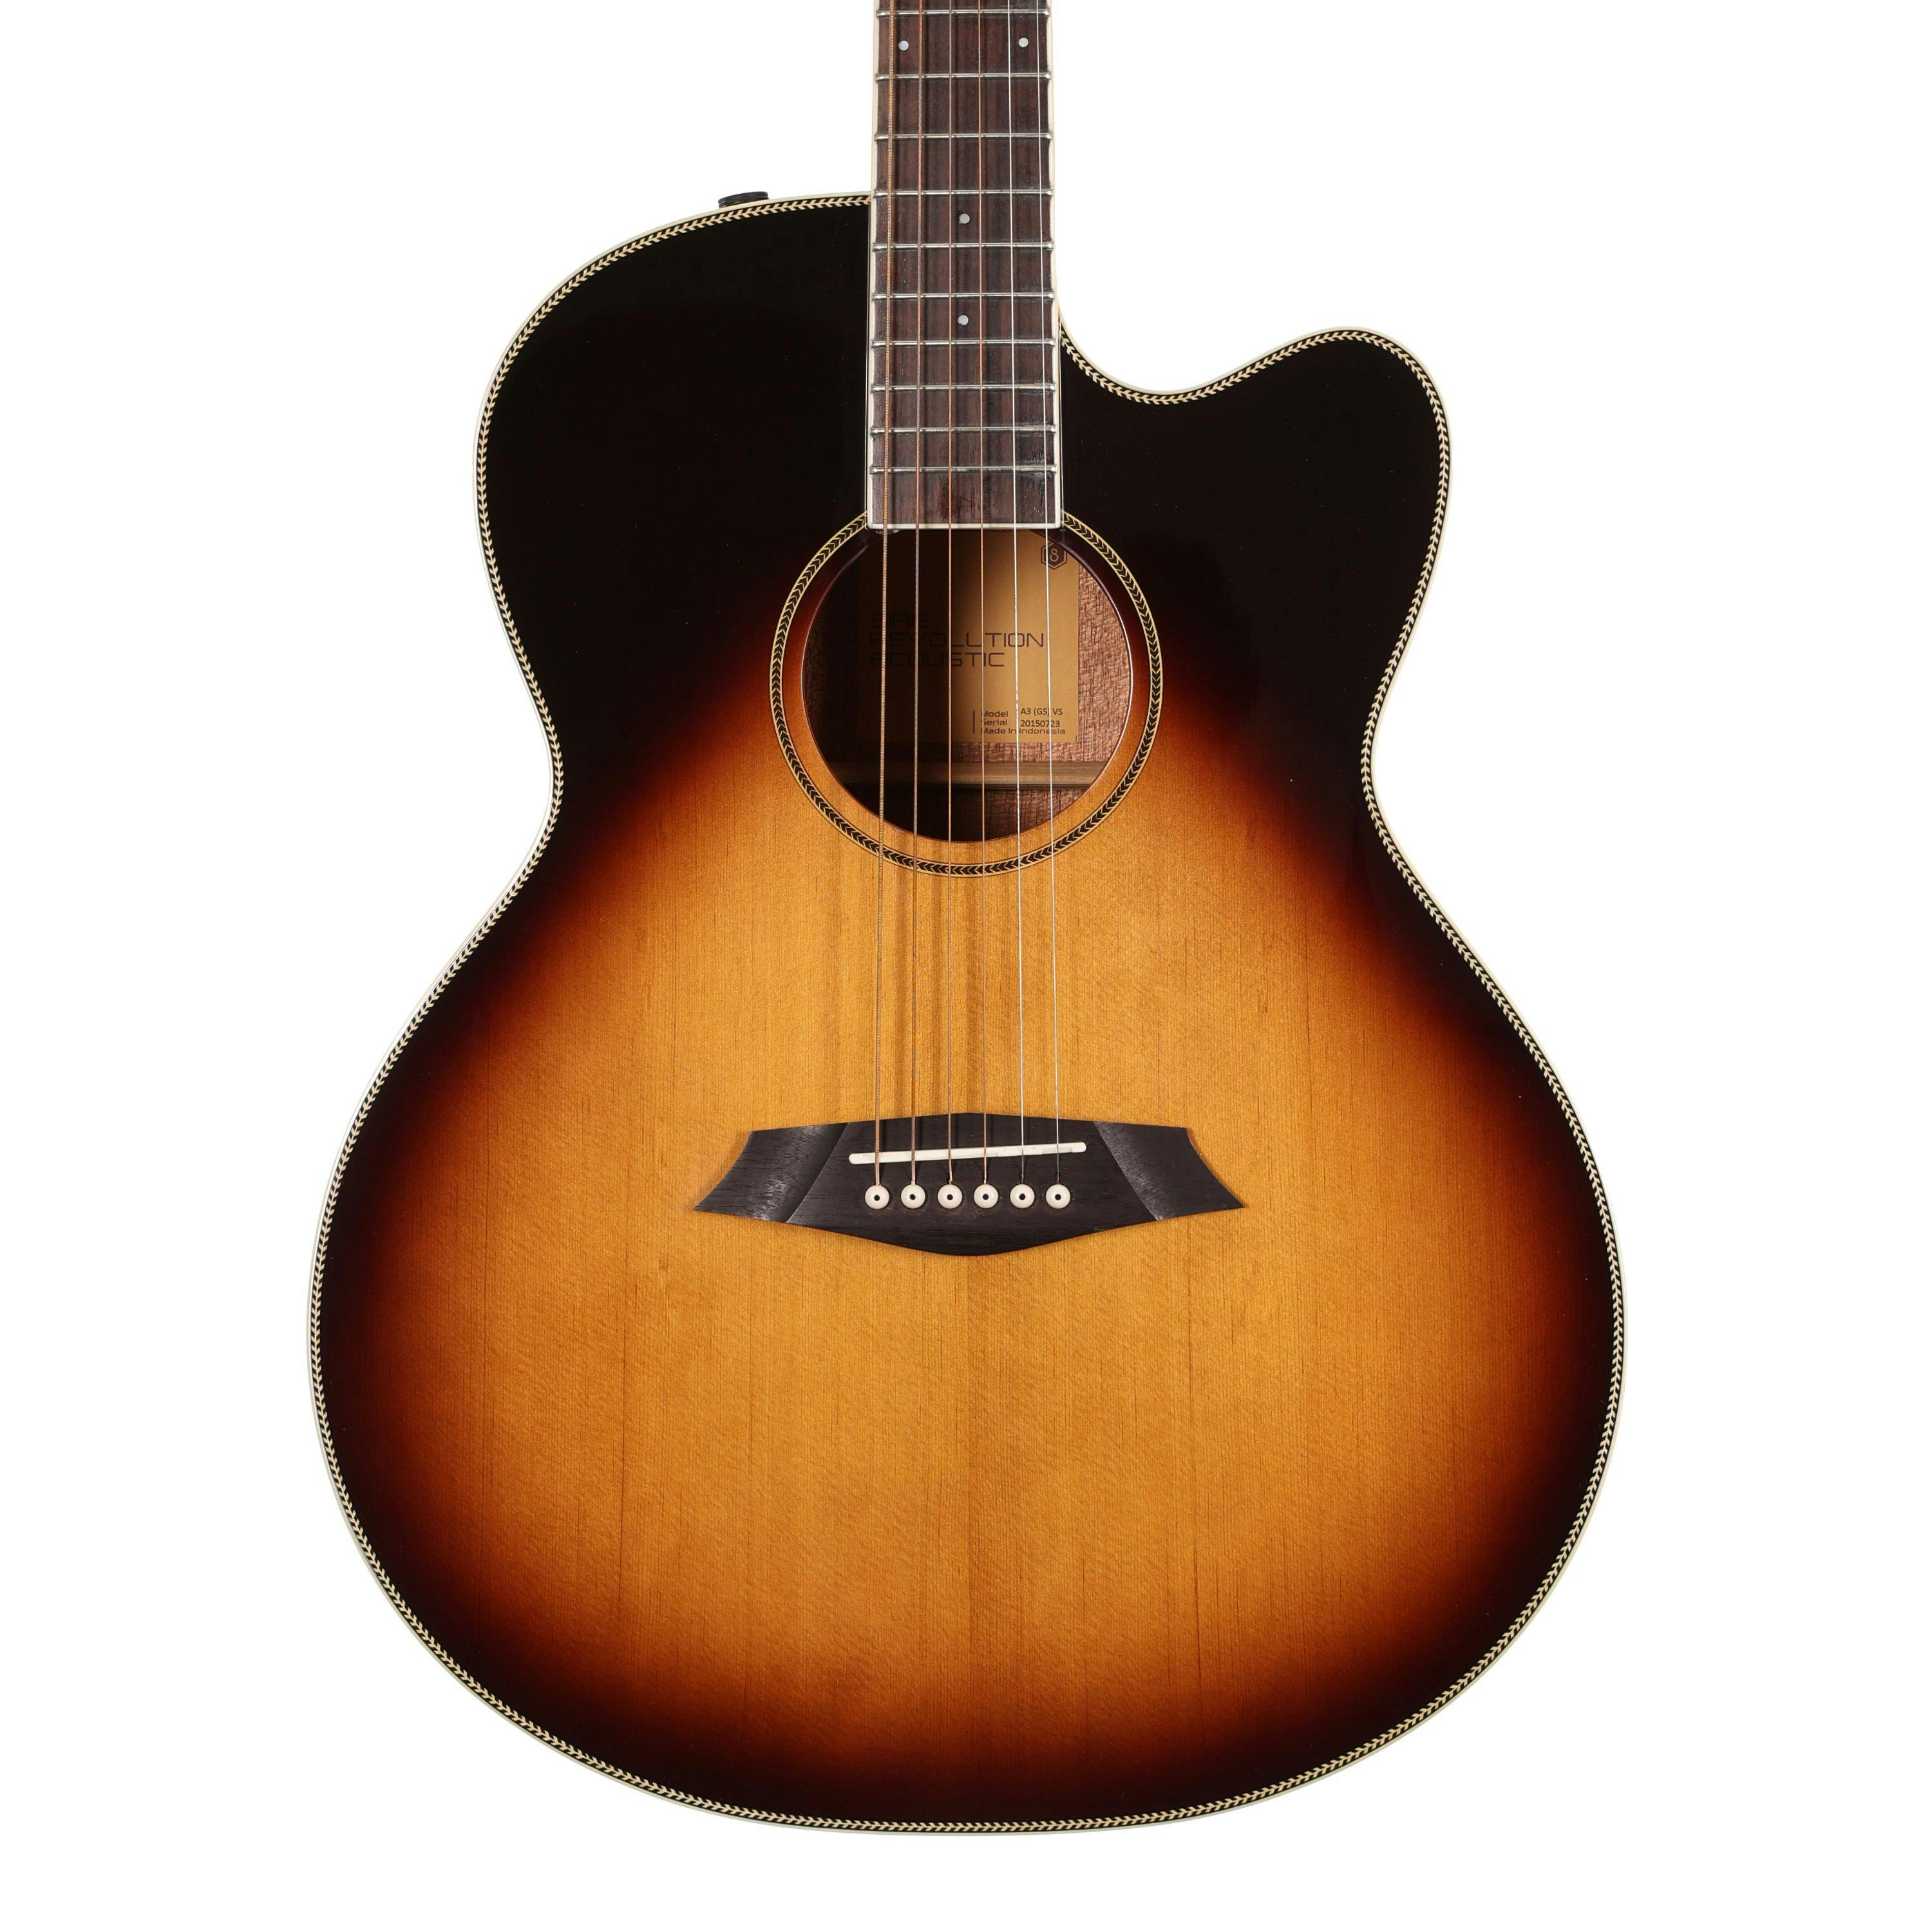 A Guide To The Sire Acoustic Guitar Range - Andertons Music Co.